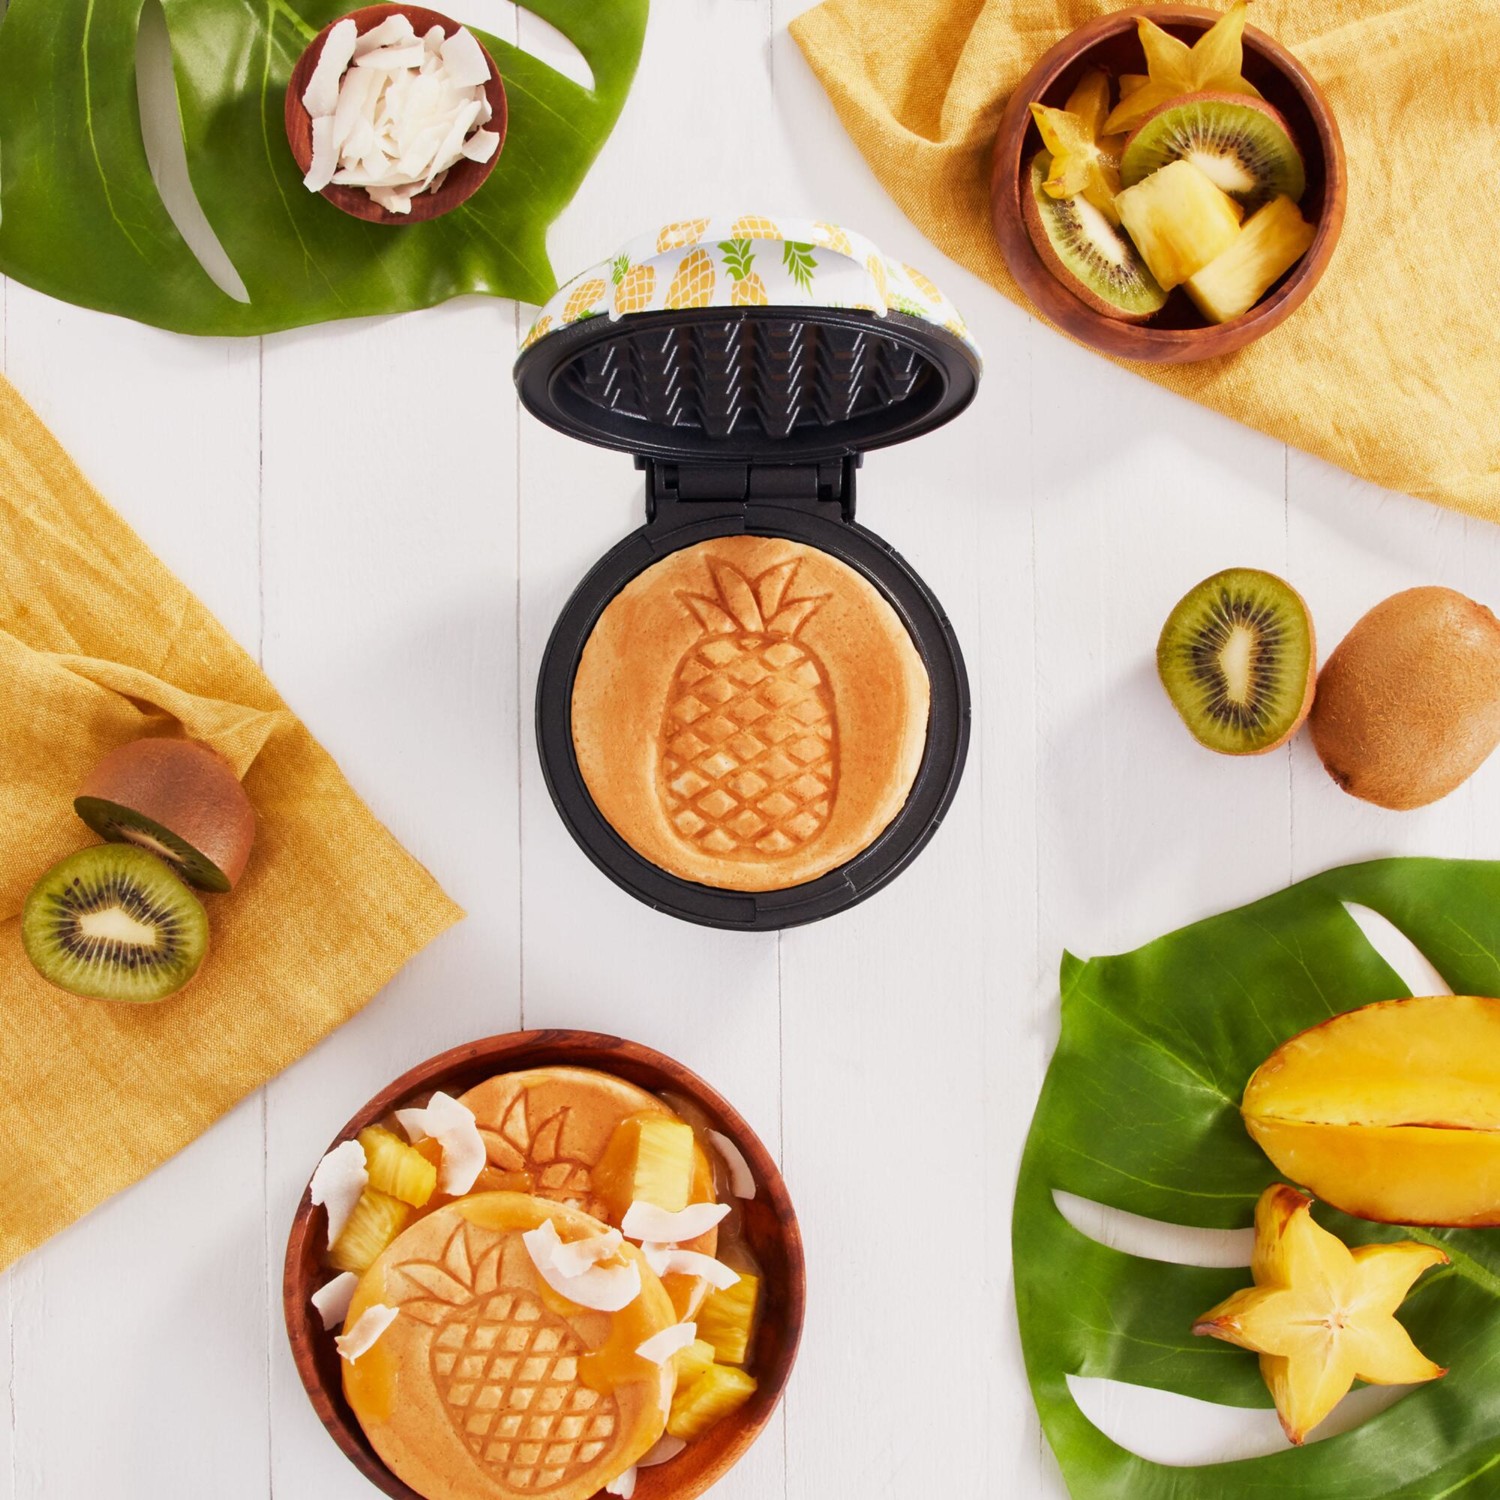 Dash Just Released 3 Mini Waffle Makers With Holiday Designs